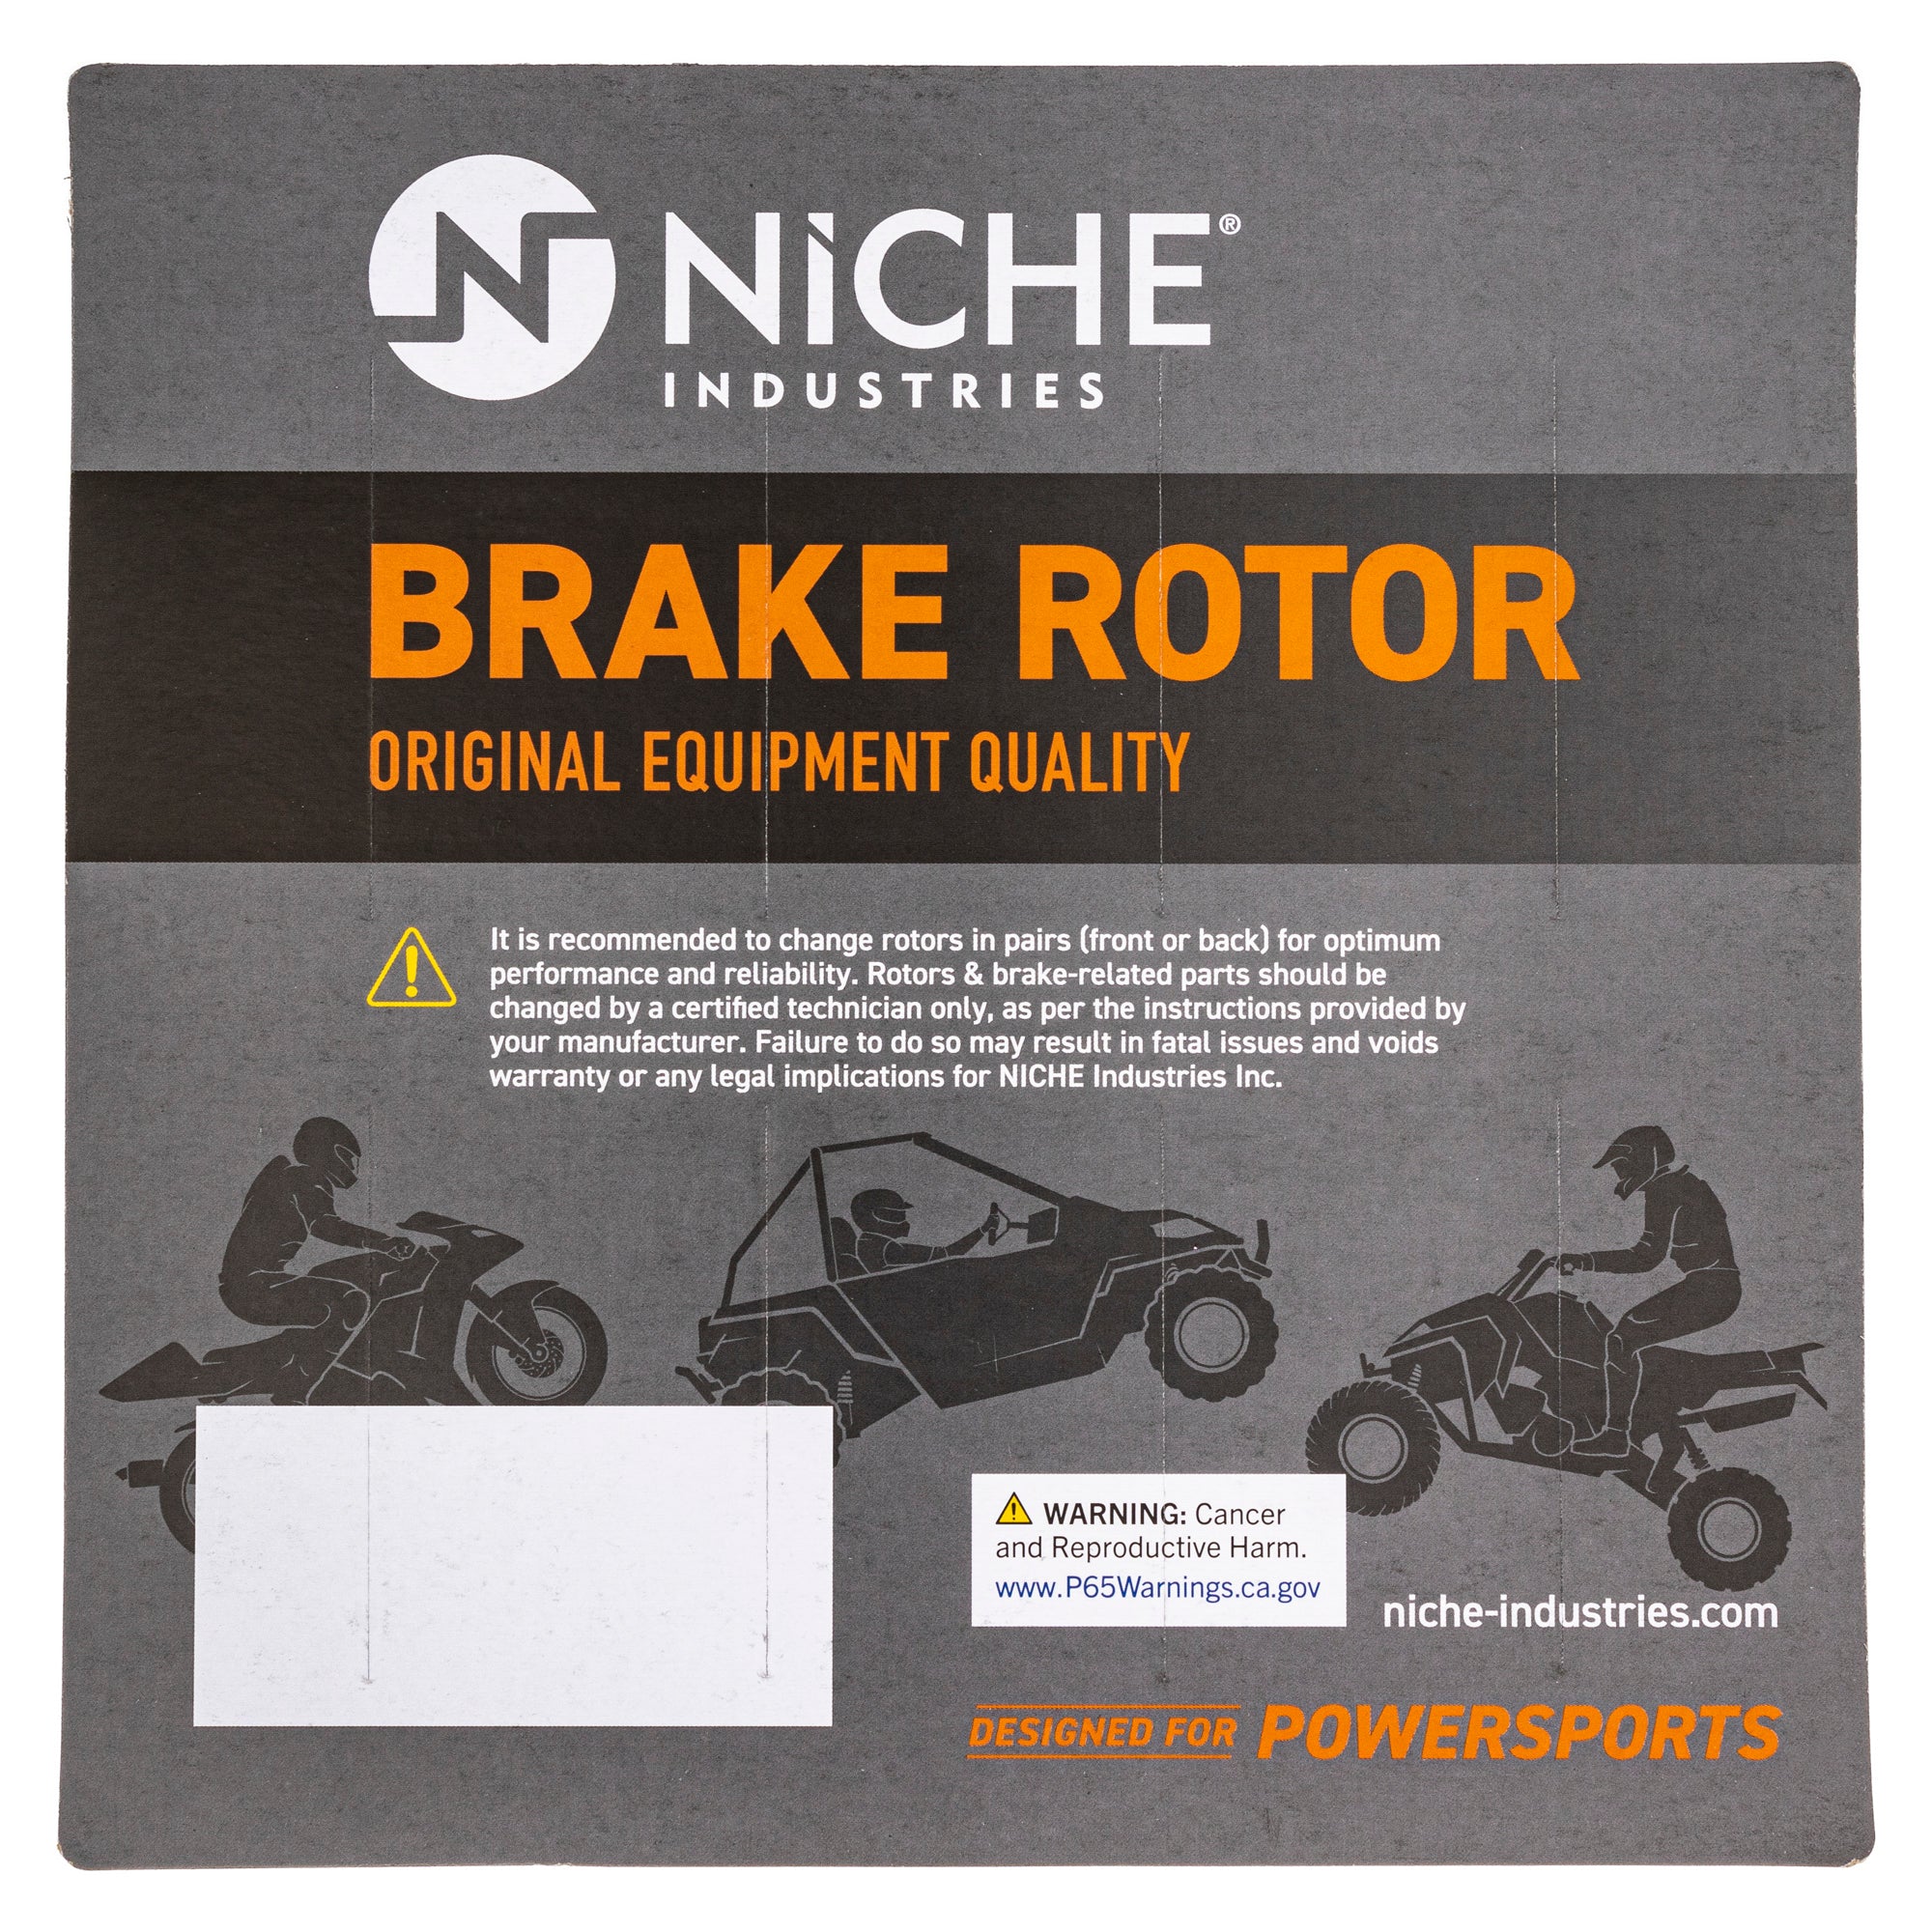 NICHE 519-CRT2497R Brake Rotor 4-Pack for zOTHER Pioneer Big